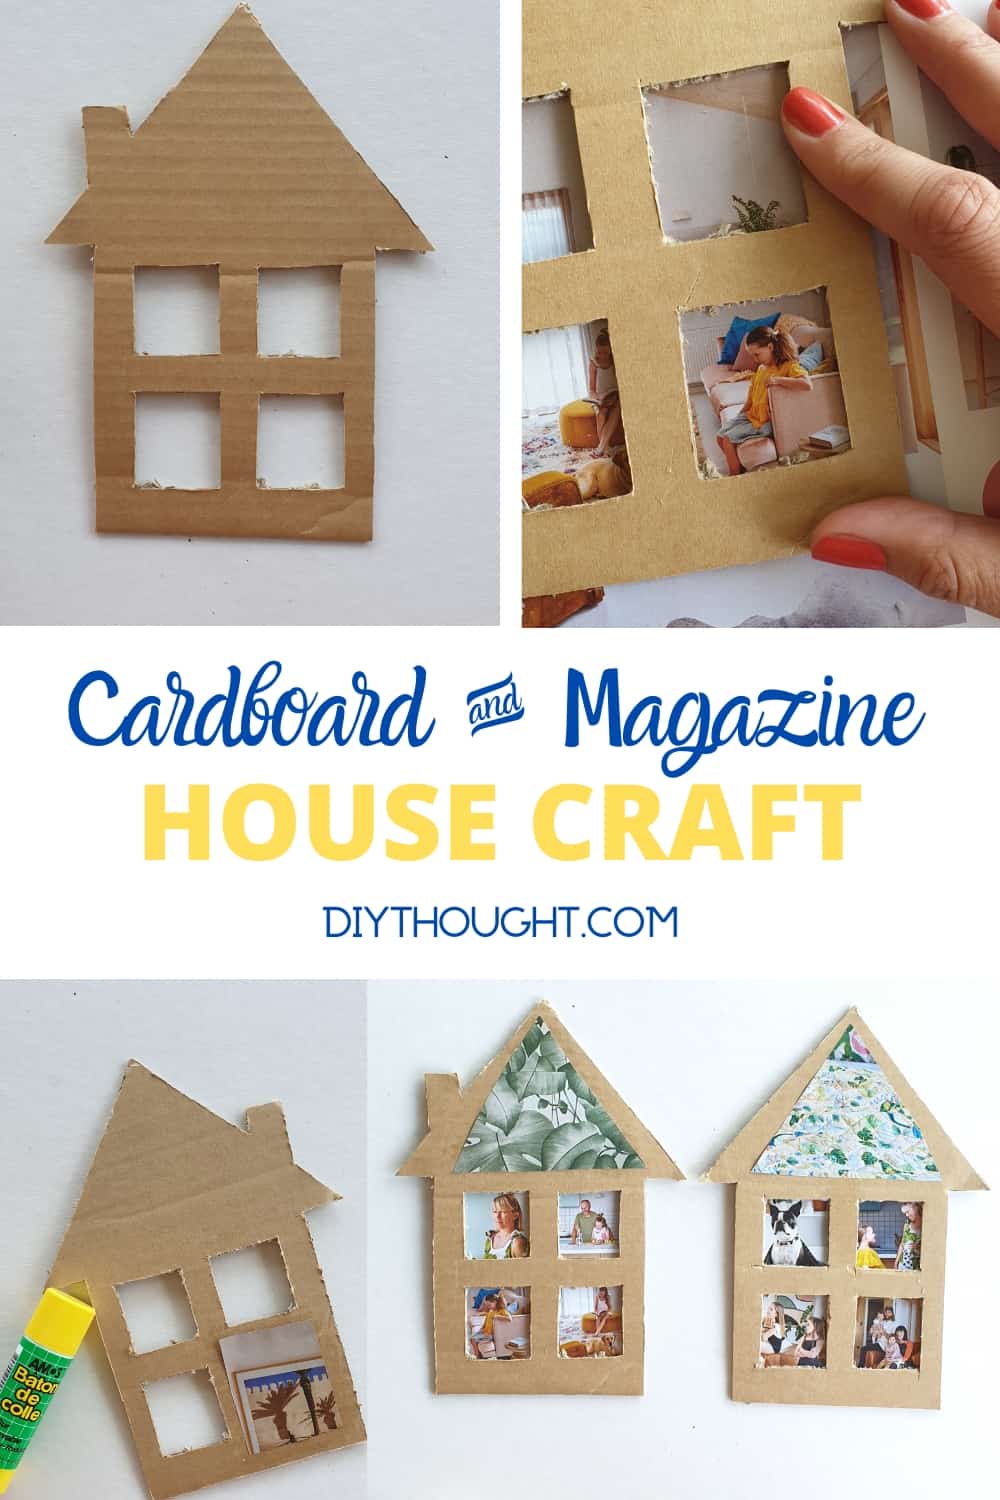 DIY House Craft from magazines and a box